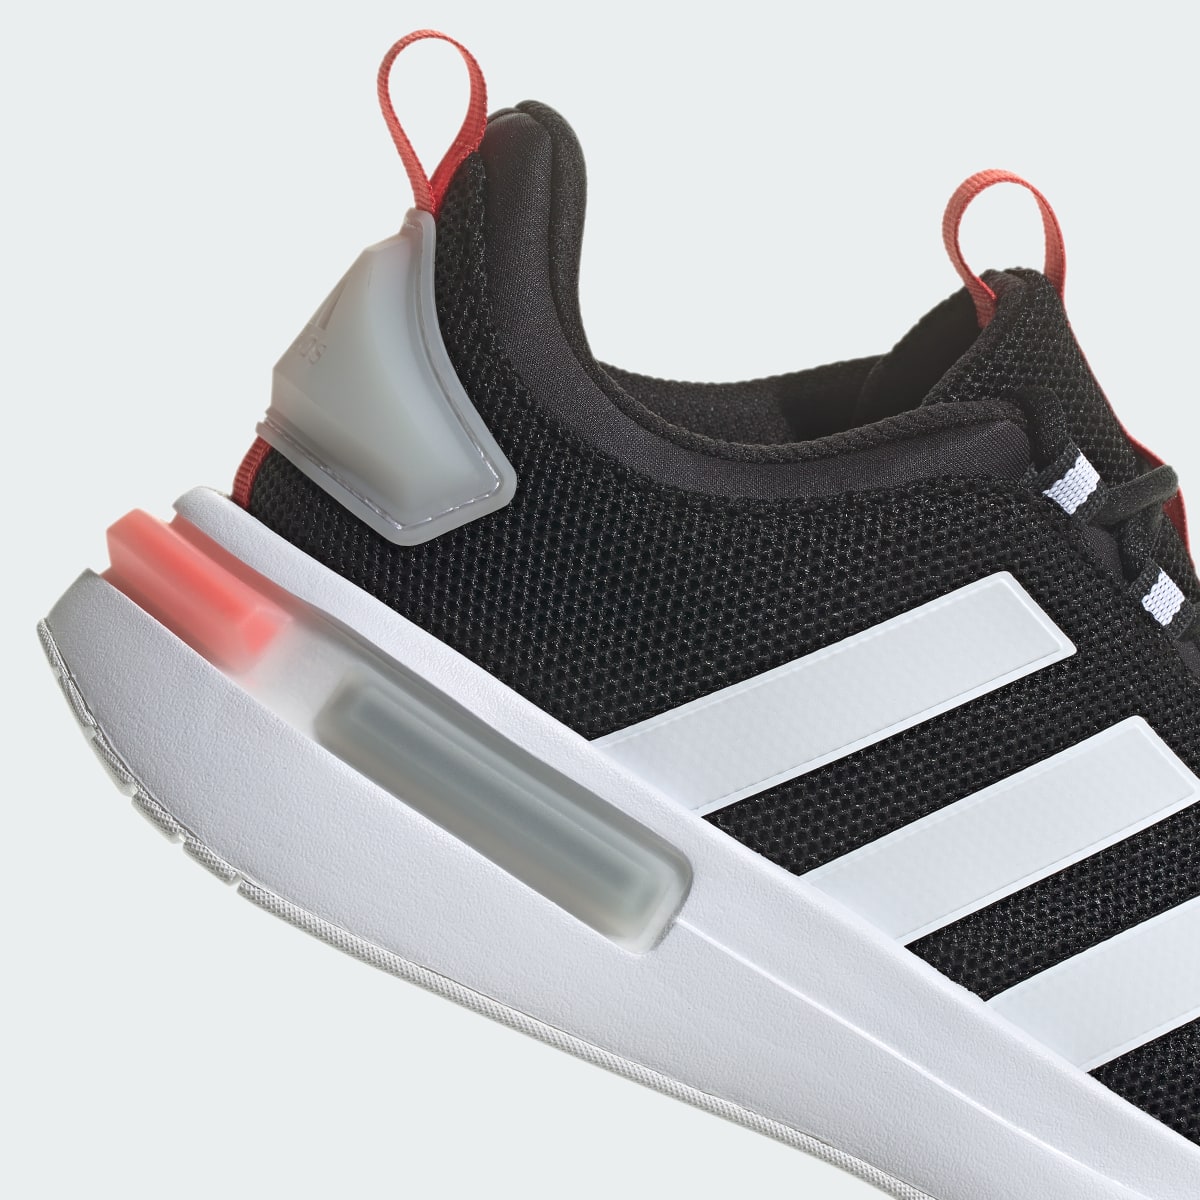 Adidas Racer TR23 Shoes. 12